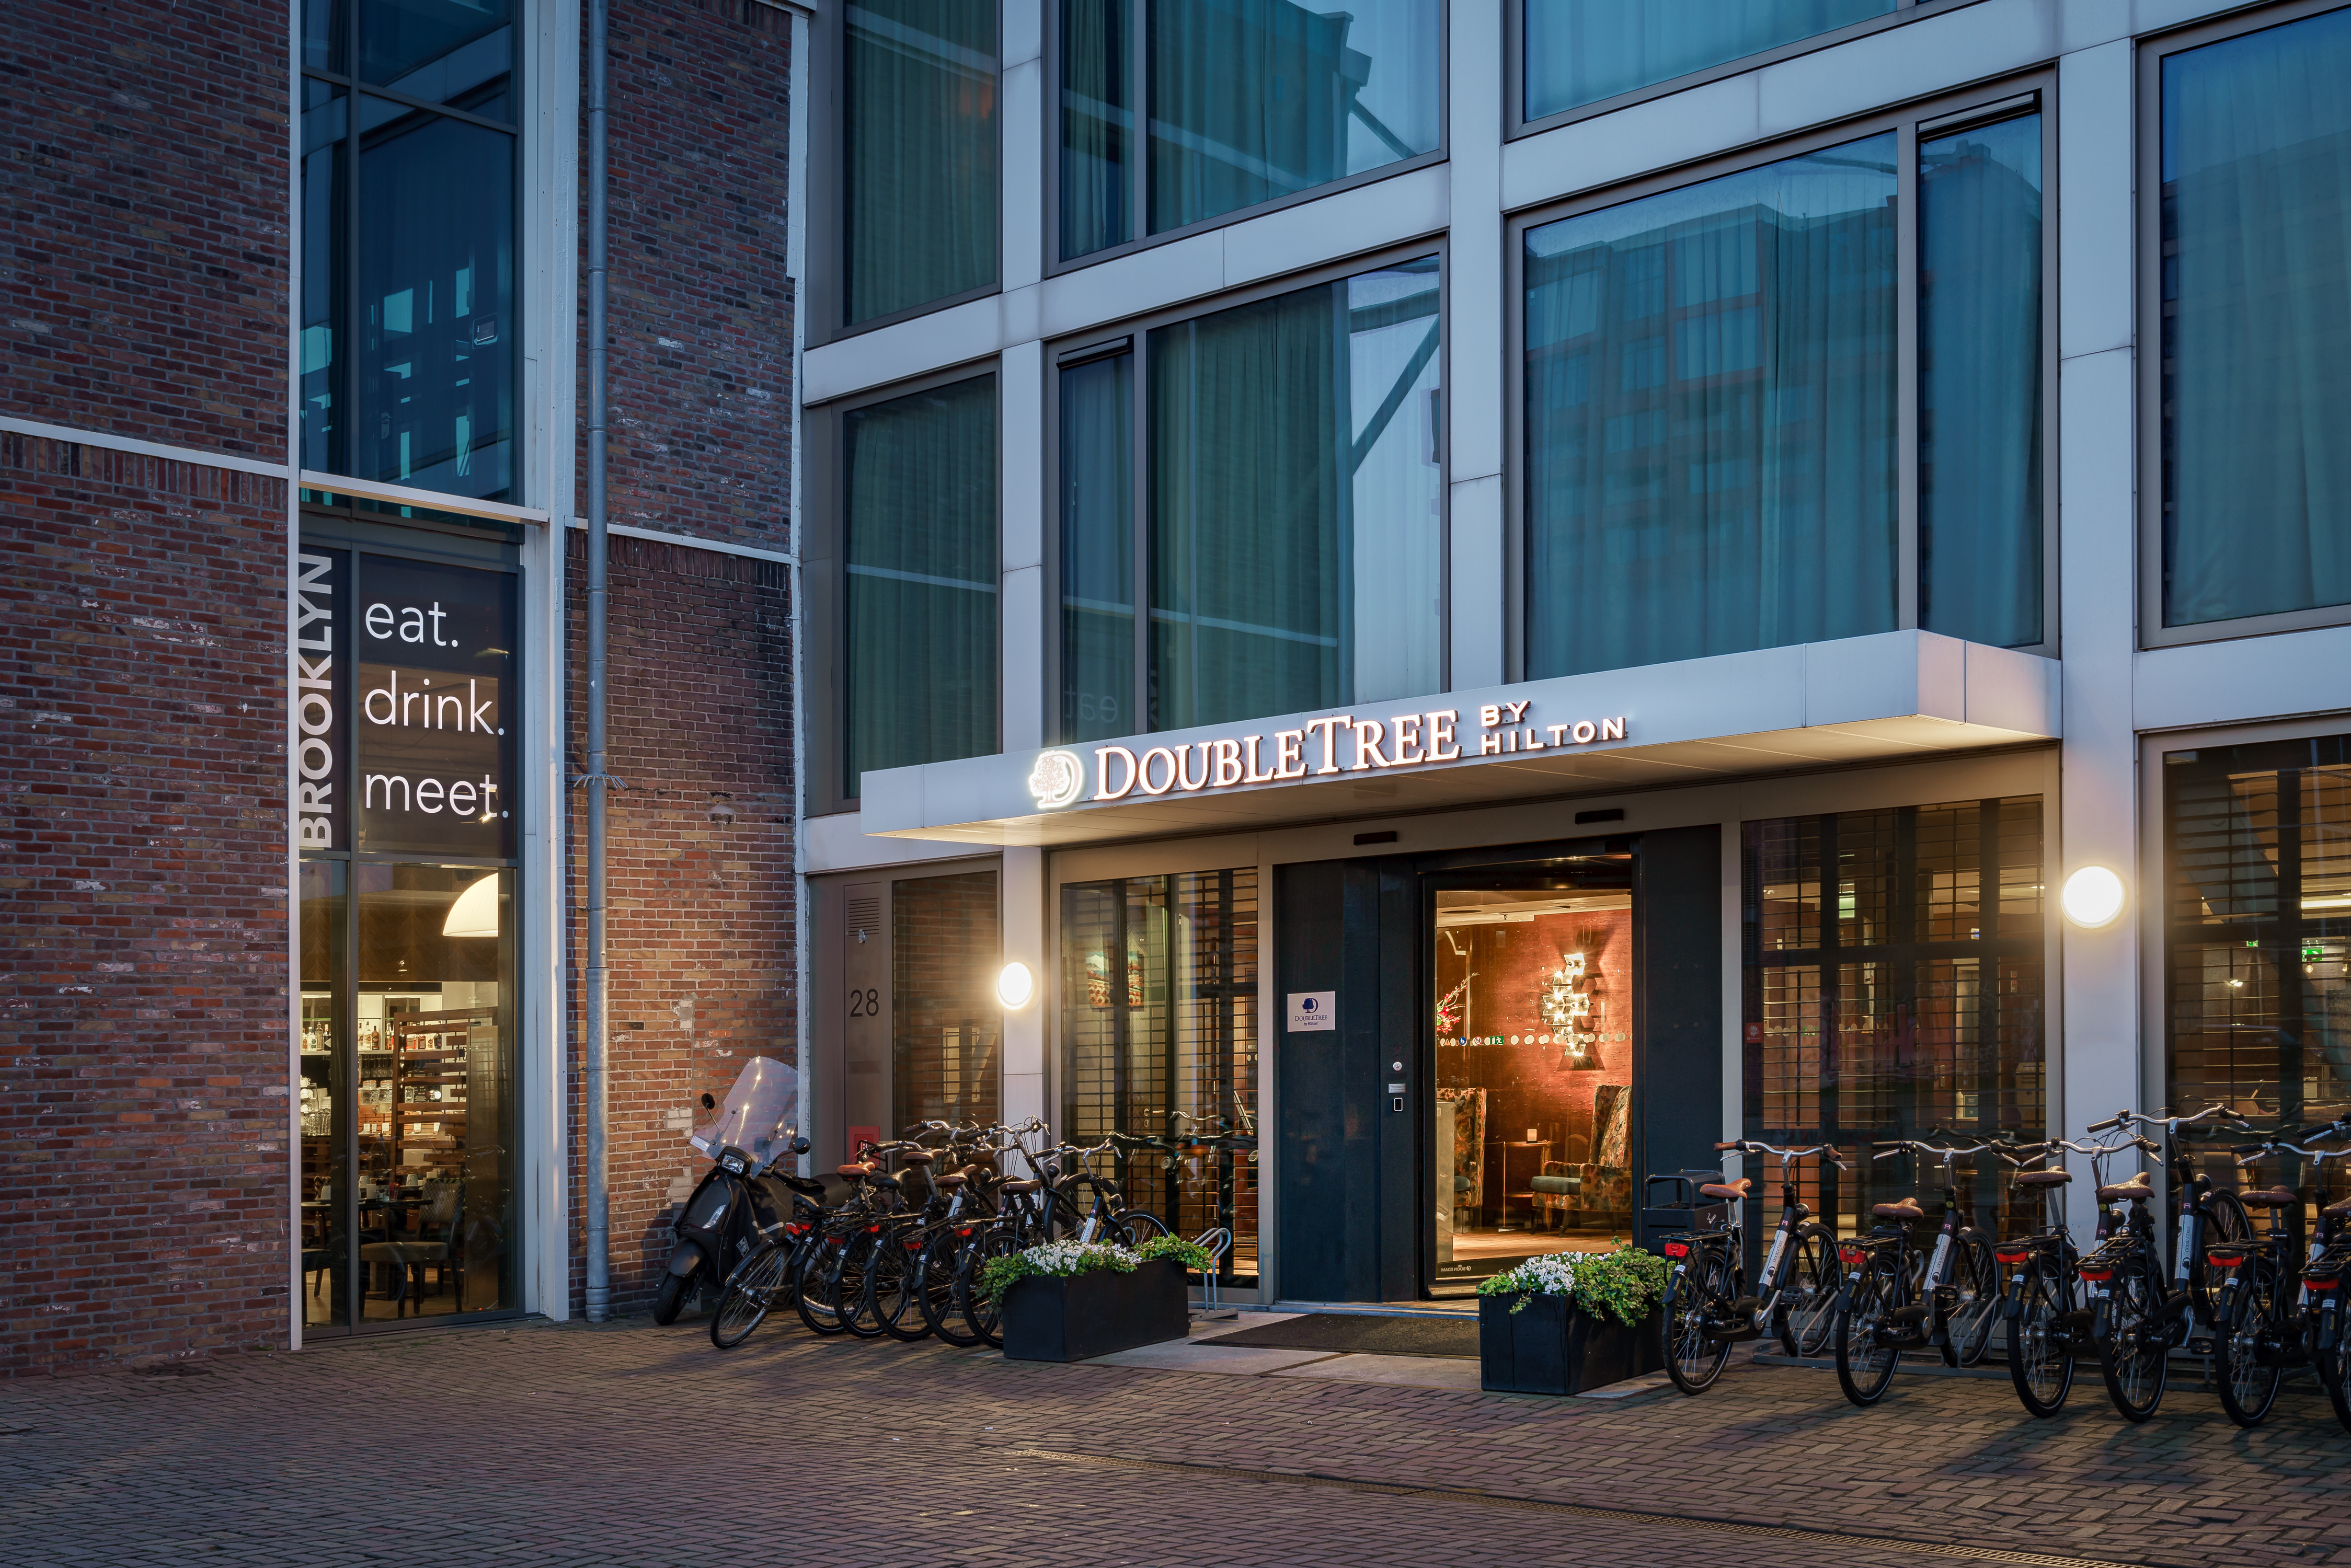 Entrance with Bicycles of DoubleTree by Hilton Hotel